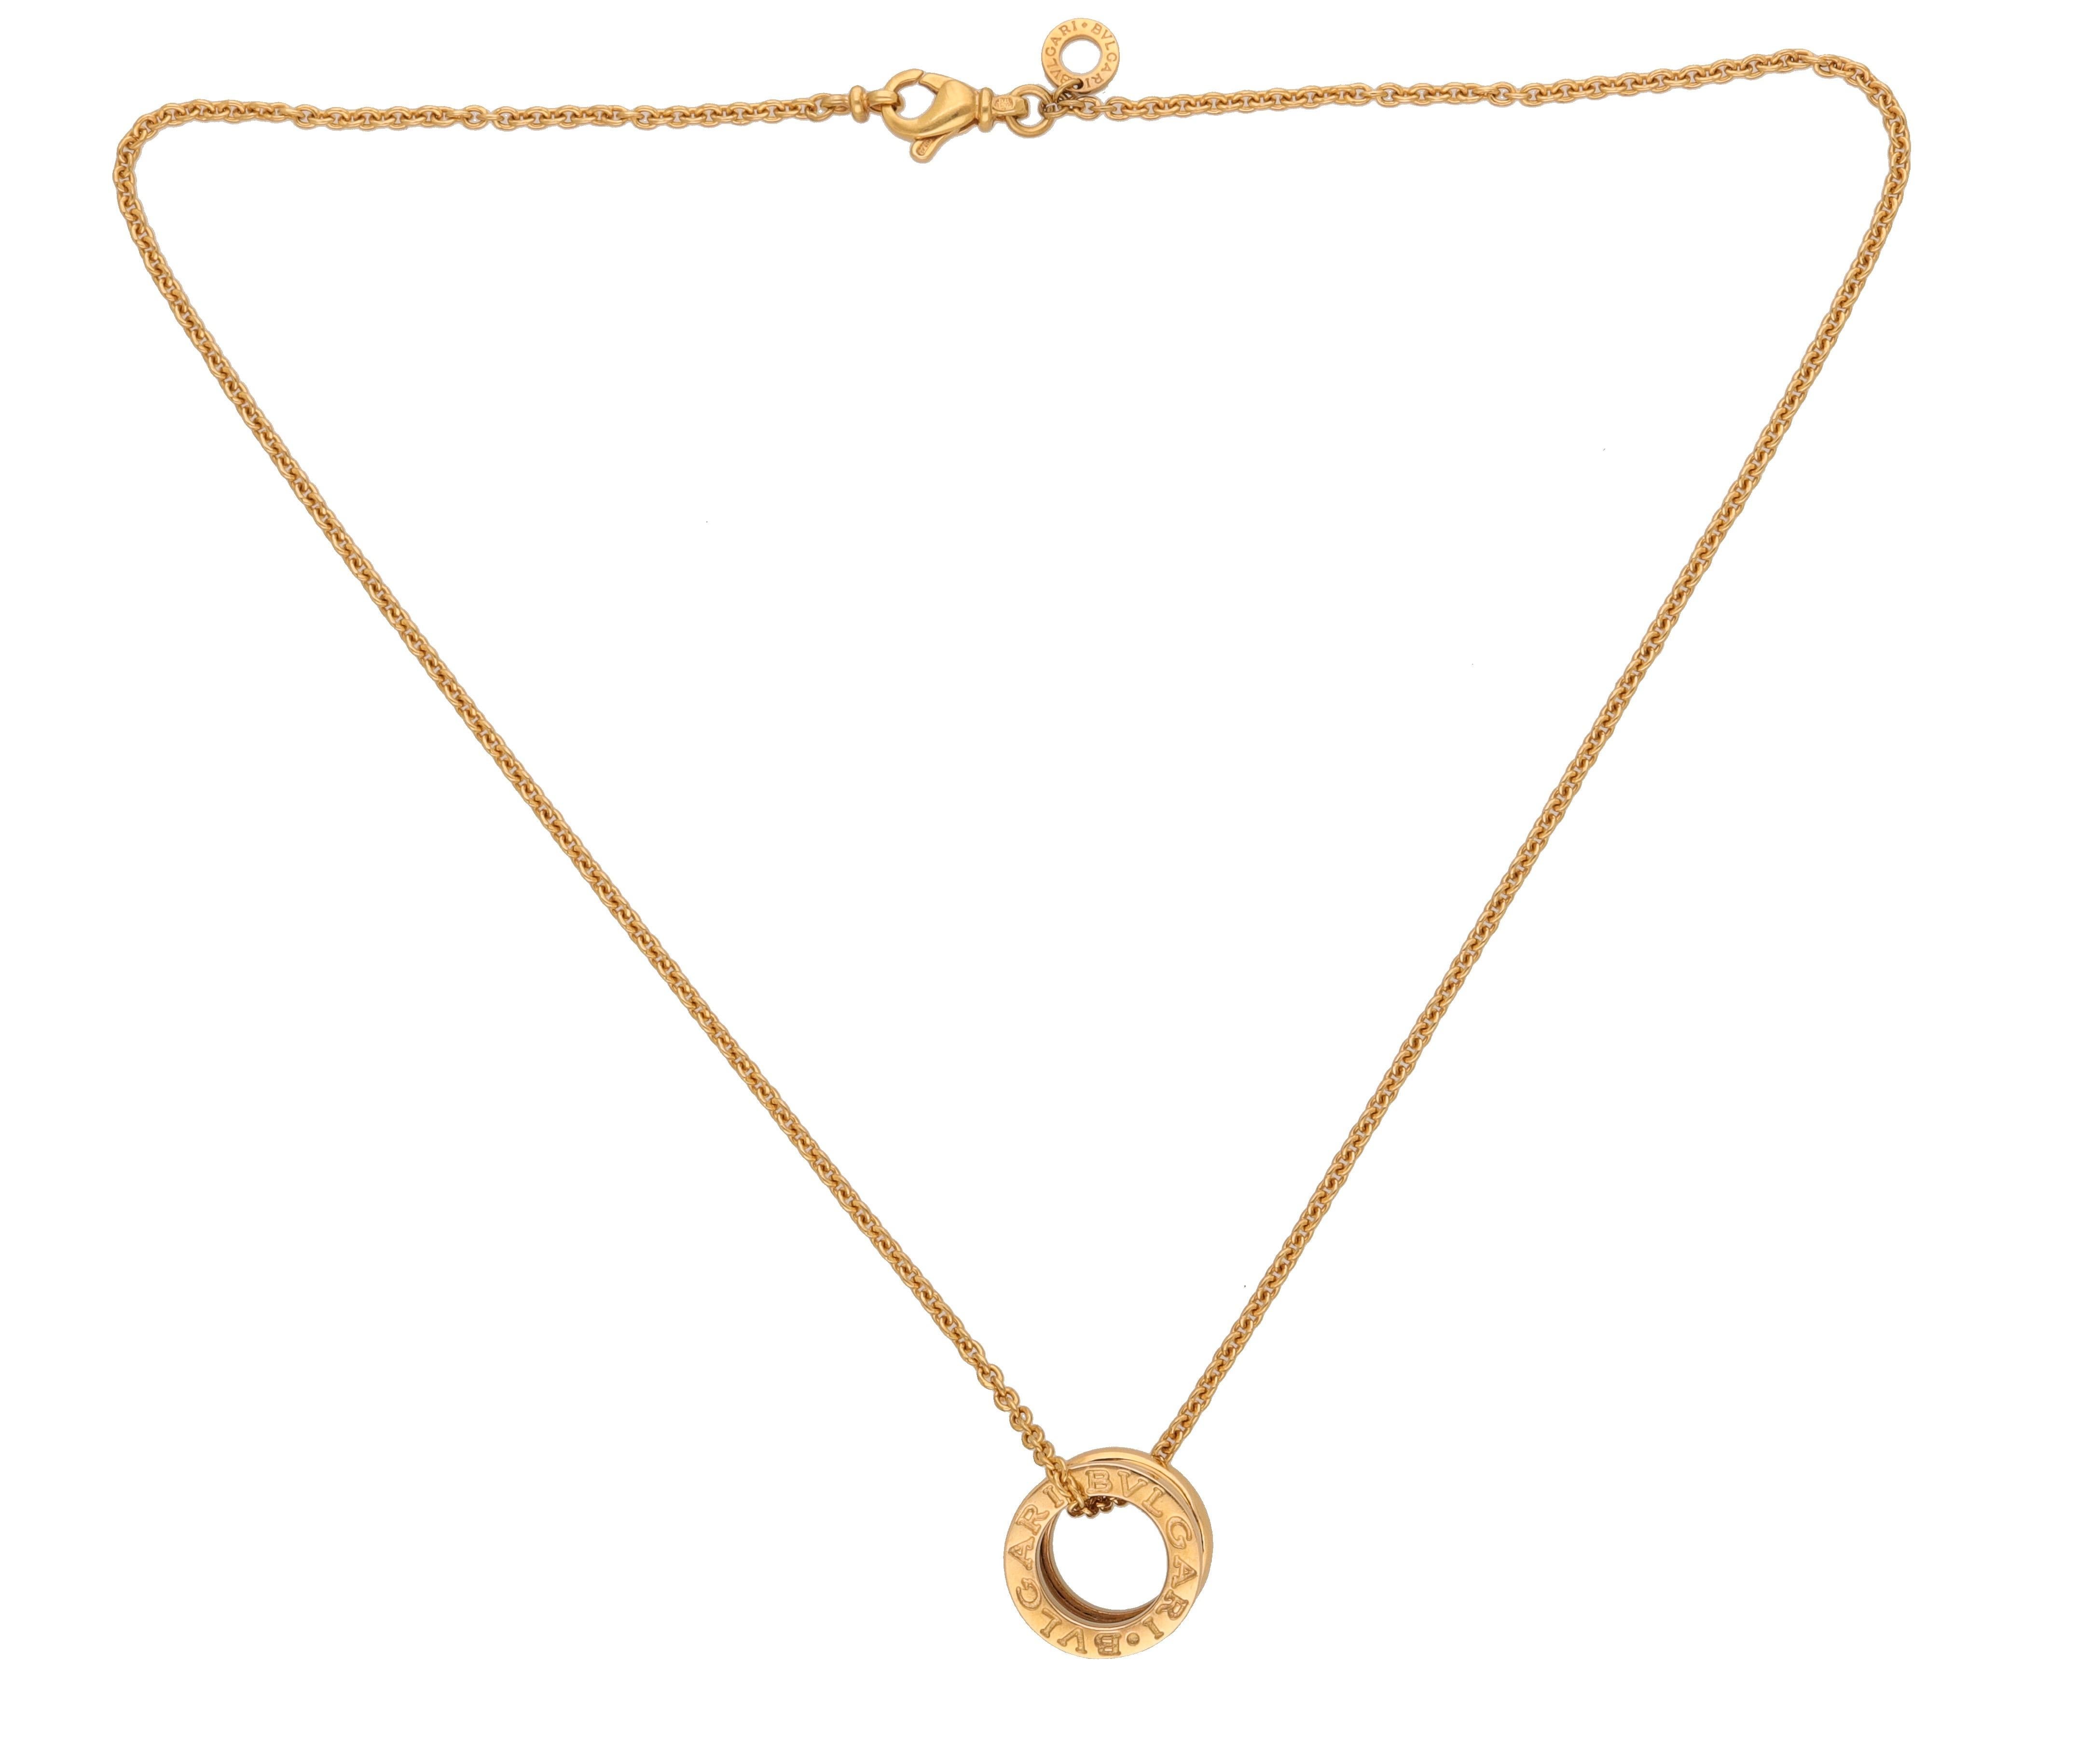 Bvlgari B.Zero1 18 Karat Yellow Gold Pendant Necklace In Excellent Condition For Sale In Rome, IT